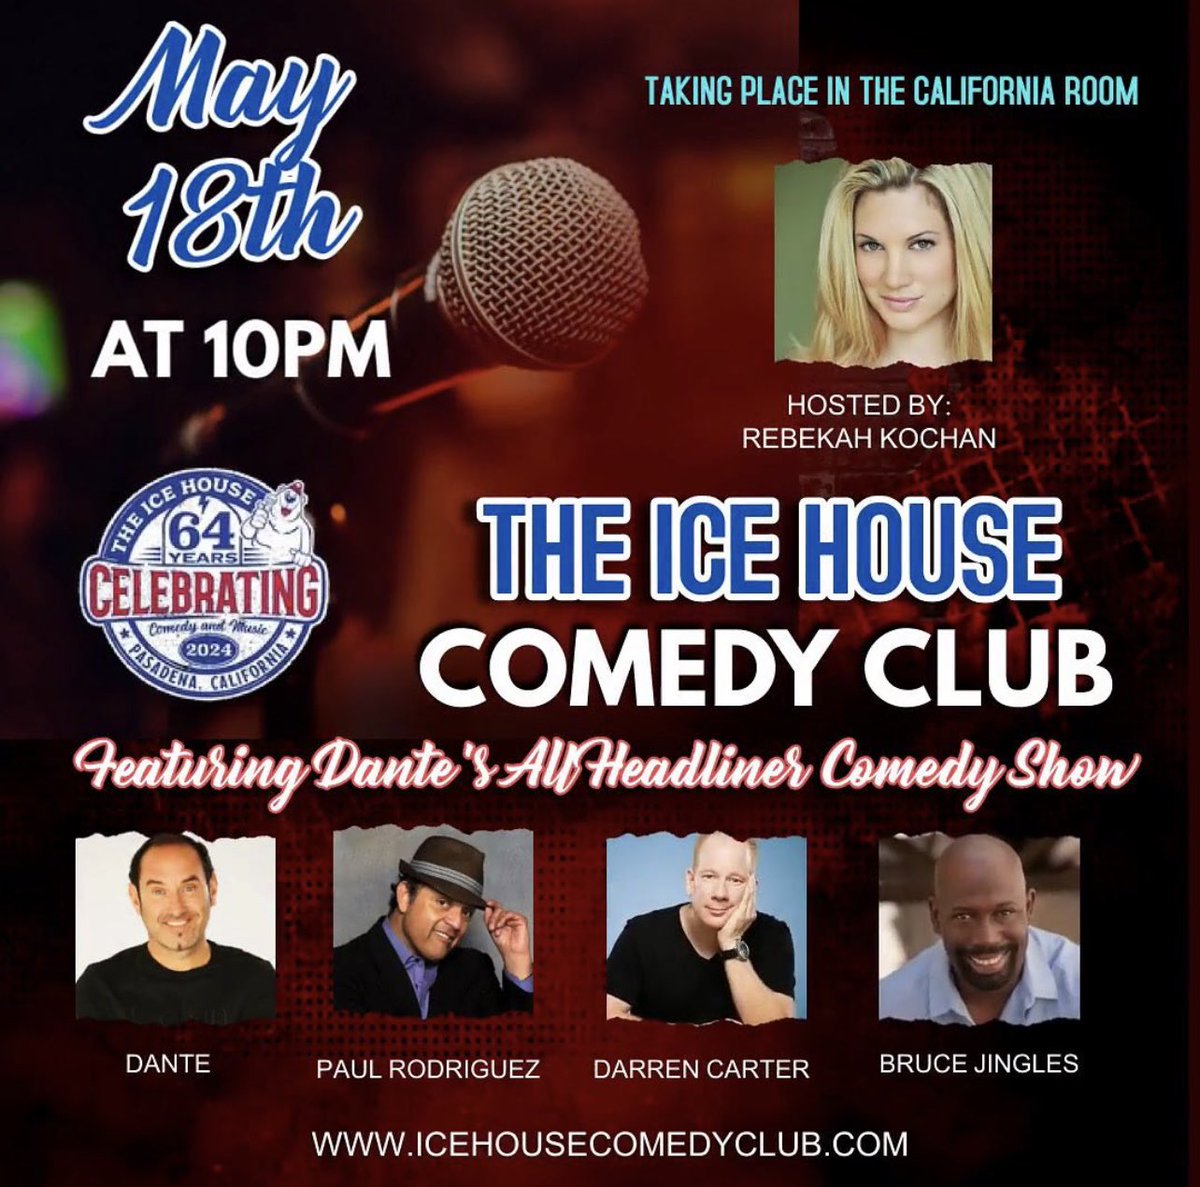 Im so excited to announce my @Dantethecomic show at the Ice House Comedy club @theicehousecc Saturday May 18th in the California room 10pm. With @Darrencarter @brucejingles hosted by @Rebekahkochan starring PAUL RODRIGUEZ! Tix showclix.com/event/the-ice-…